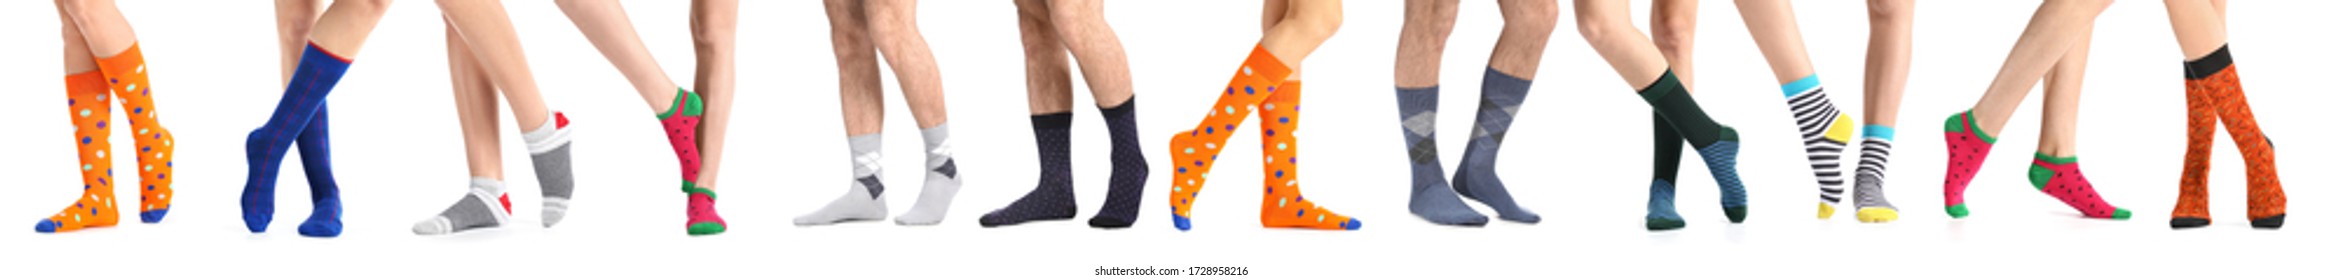 Legs of people in different socks on white background